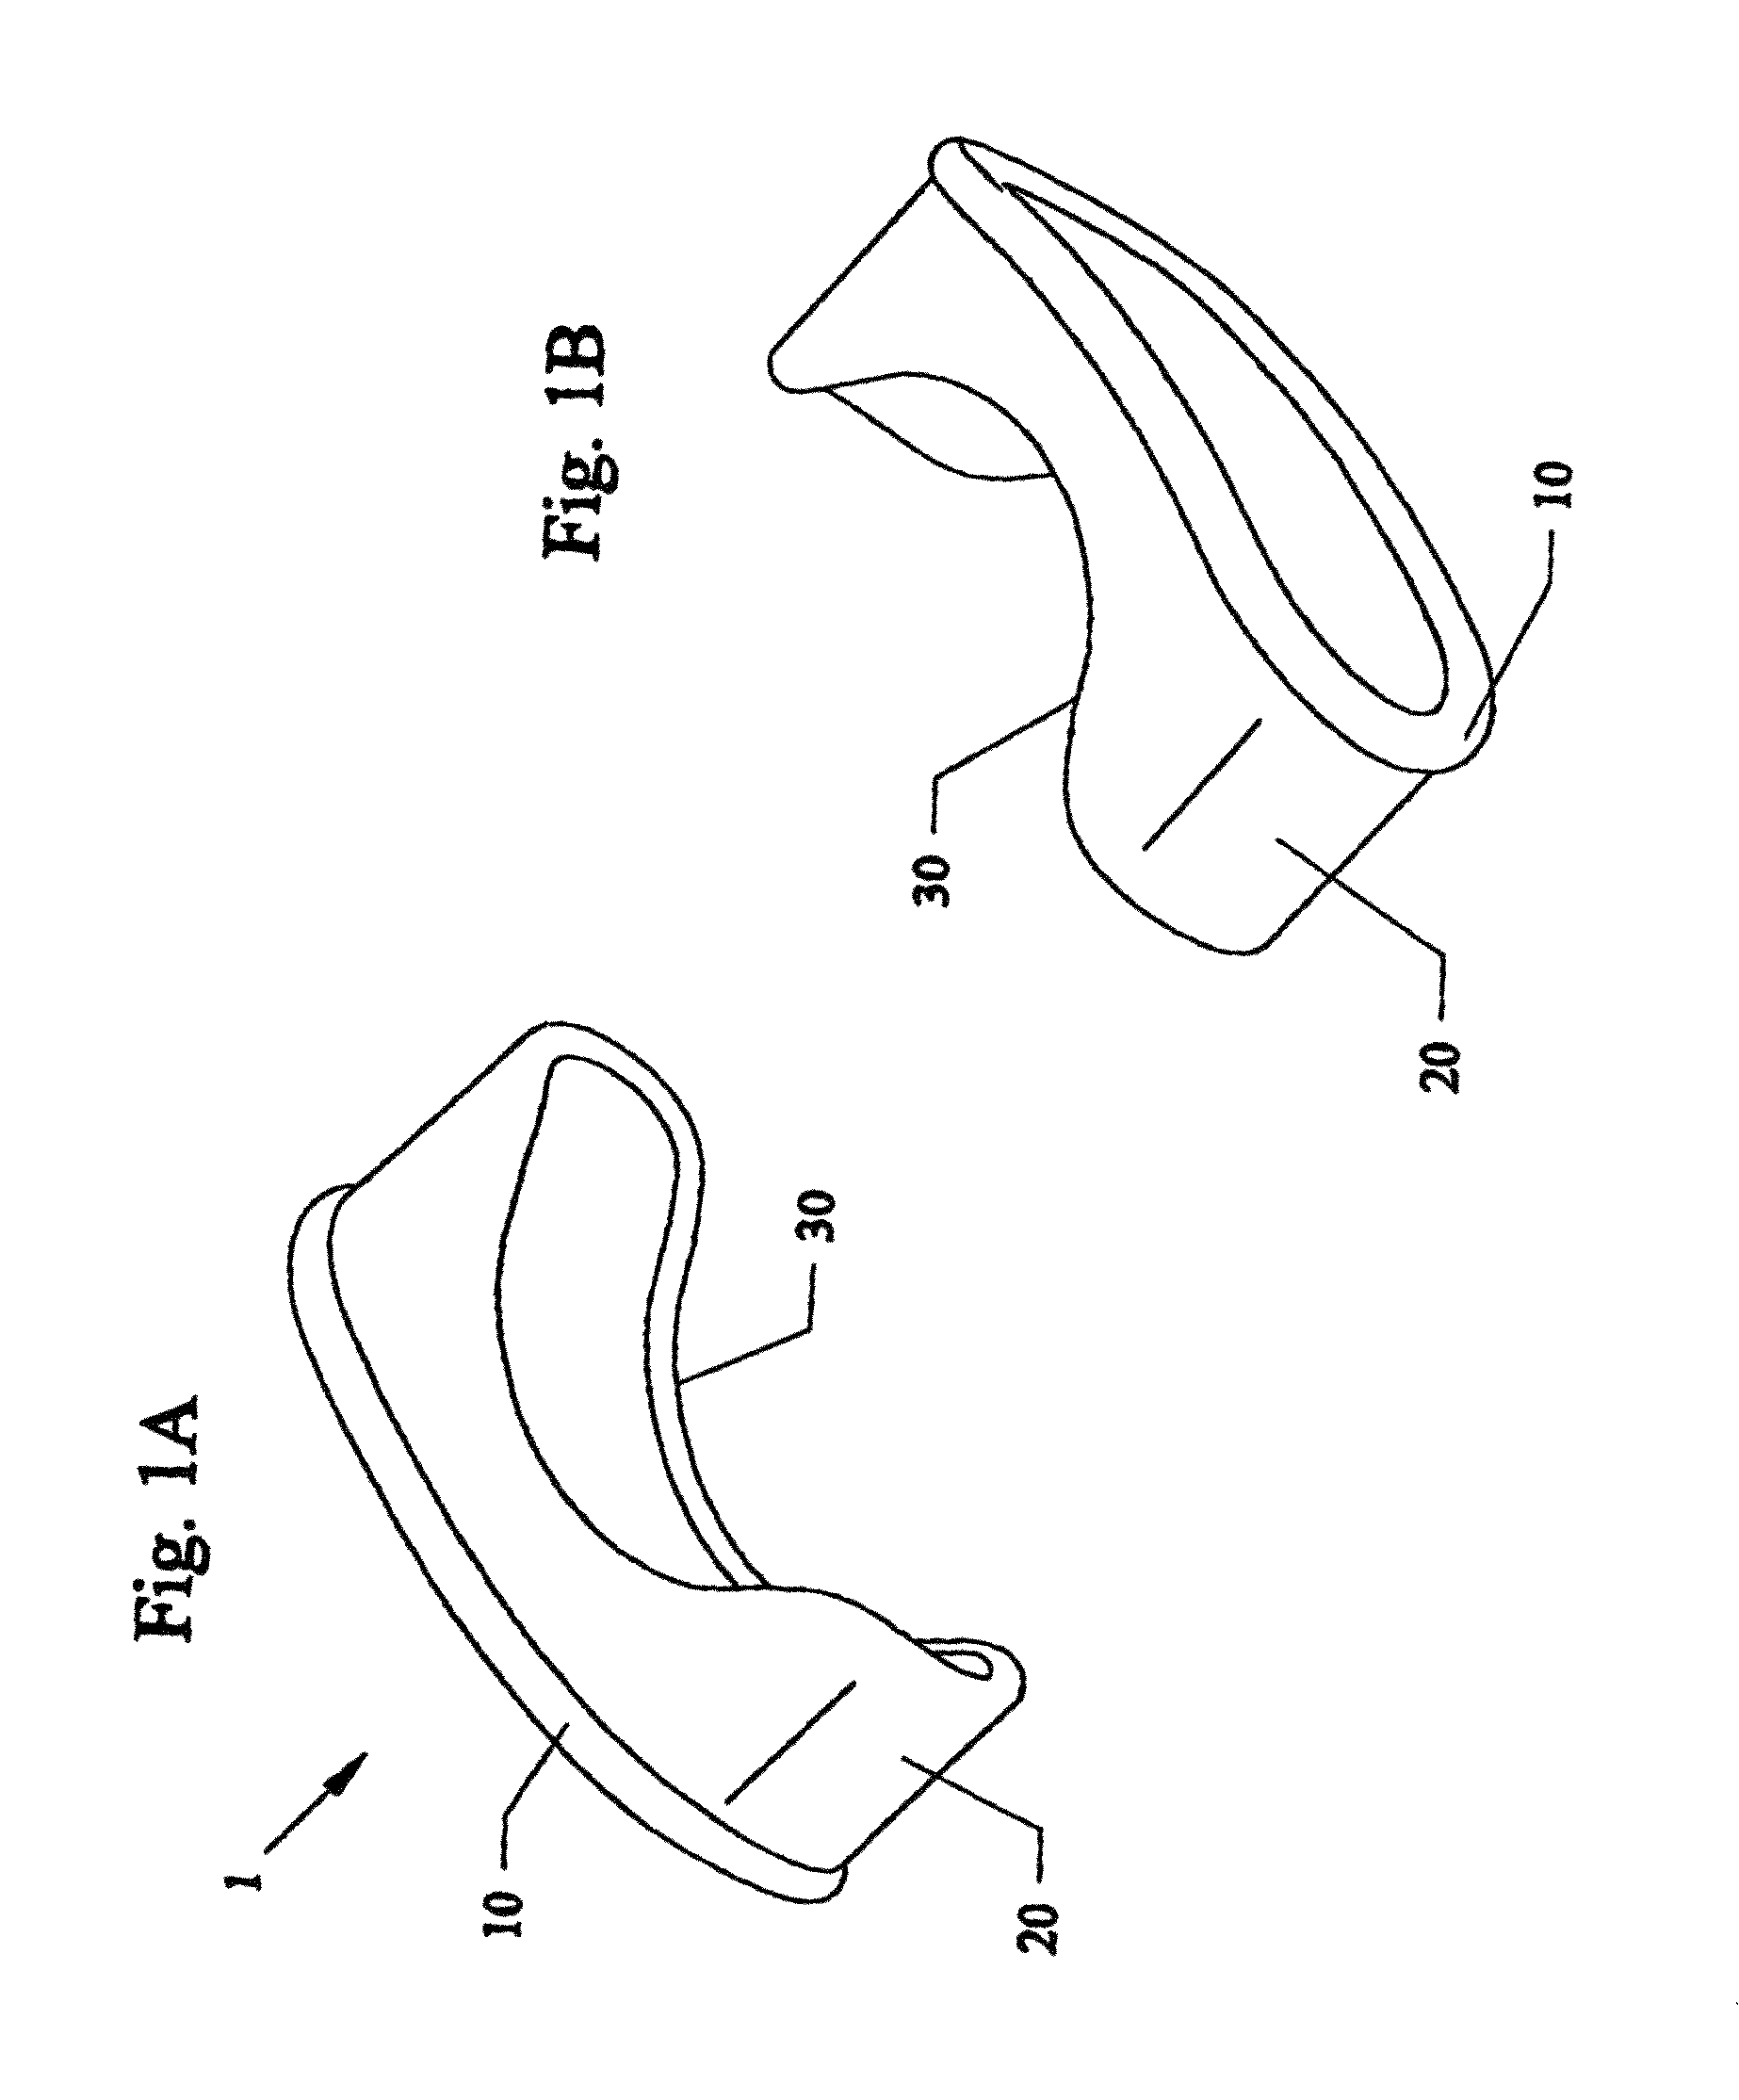 Mouthpiece devices and methods to allow UV whitening of teeth